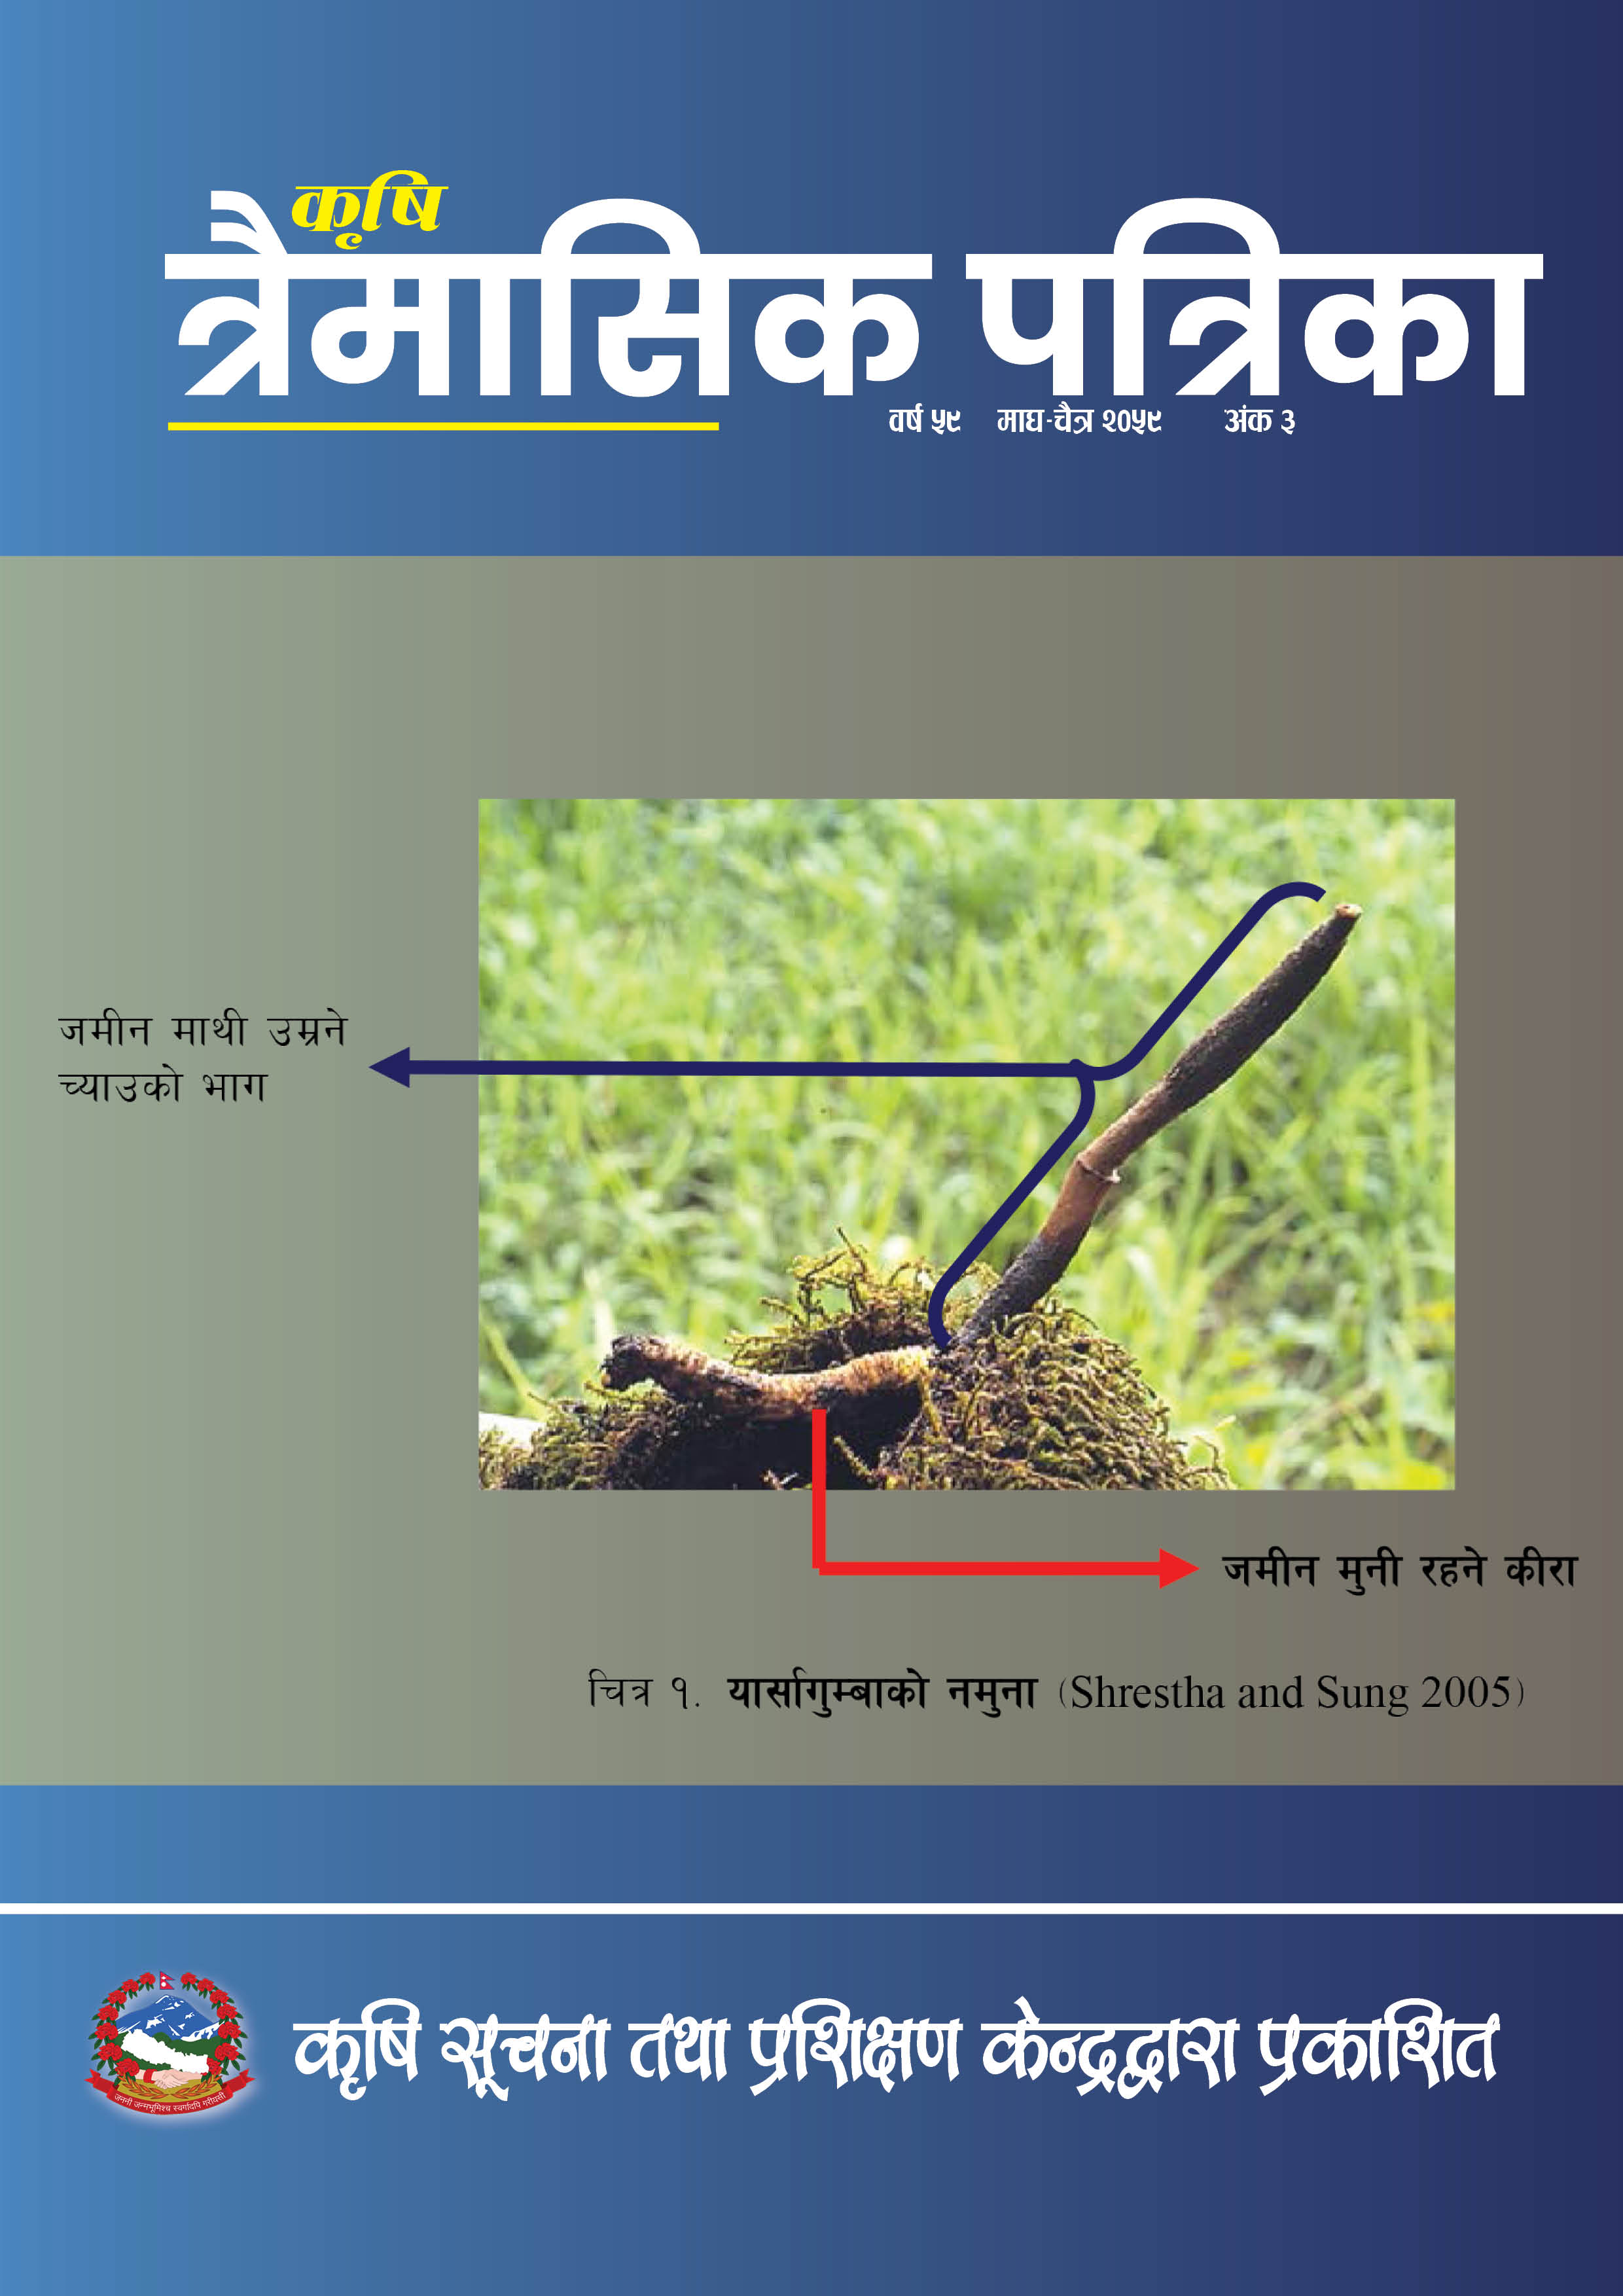 Cover image of Agricultural Quarterly, 2079 (Jan-Mar.) Issue 3